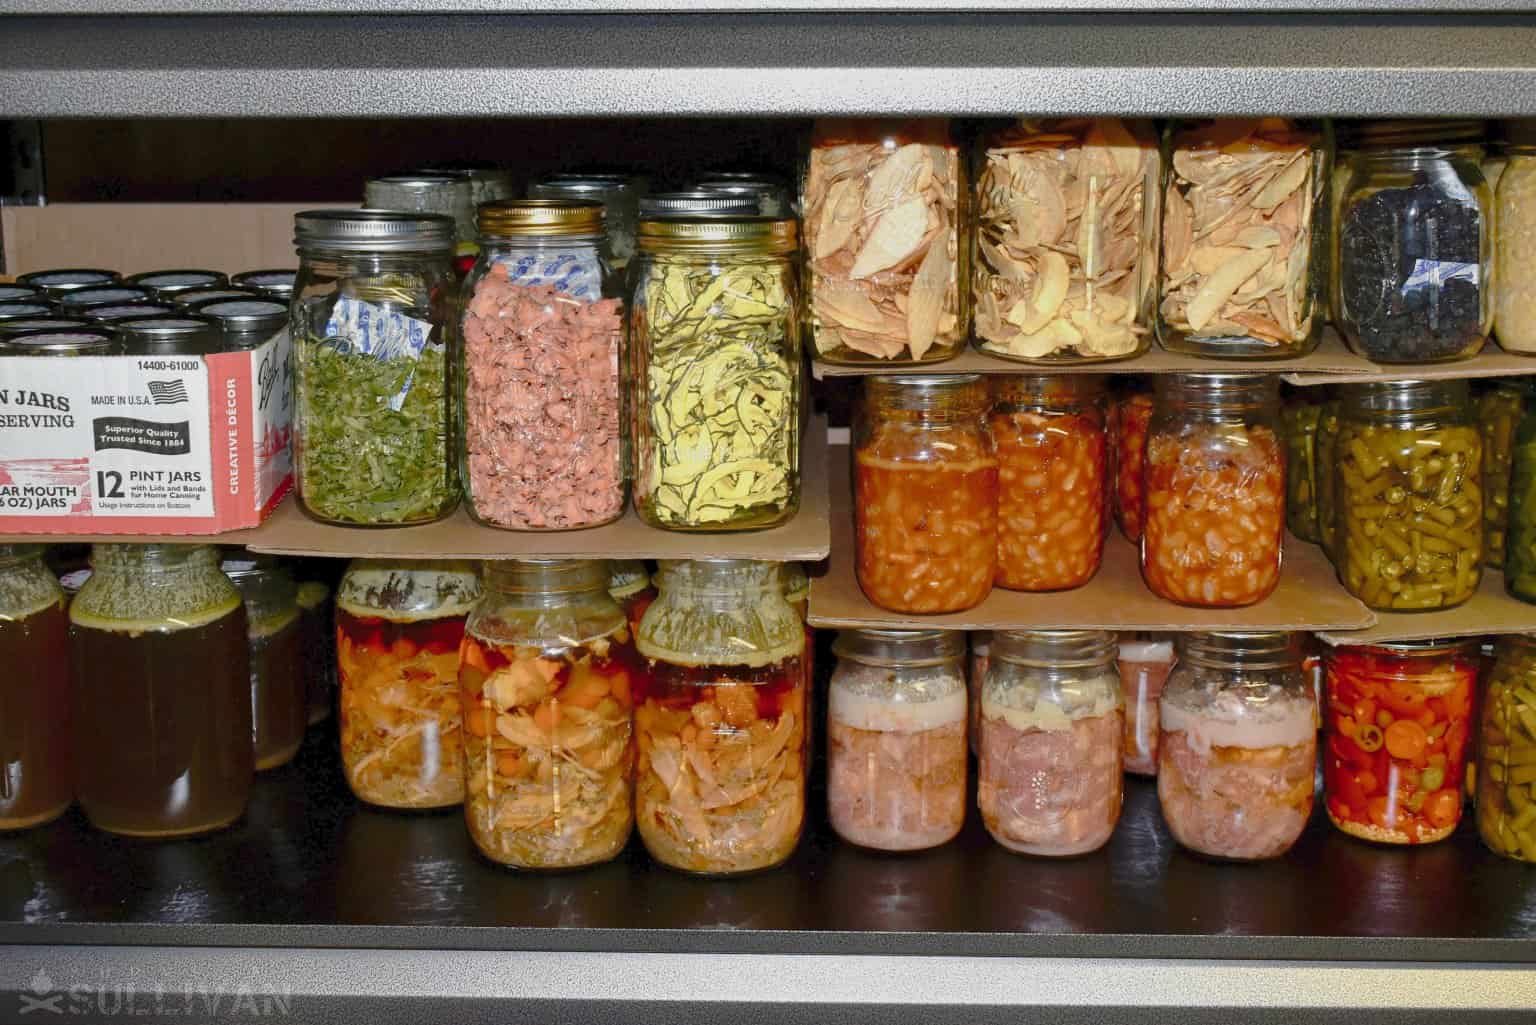 Home (pressure) canned and dehydrated long term pantry meals and sides.